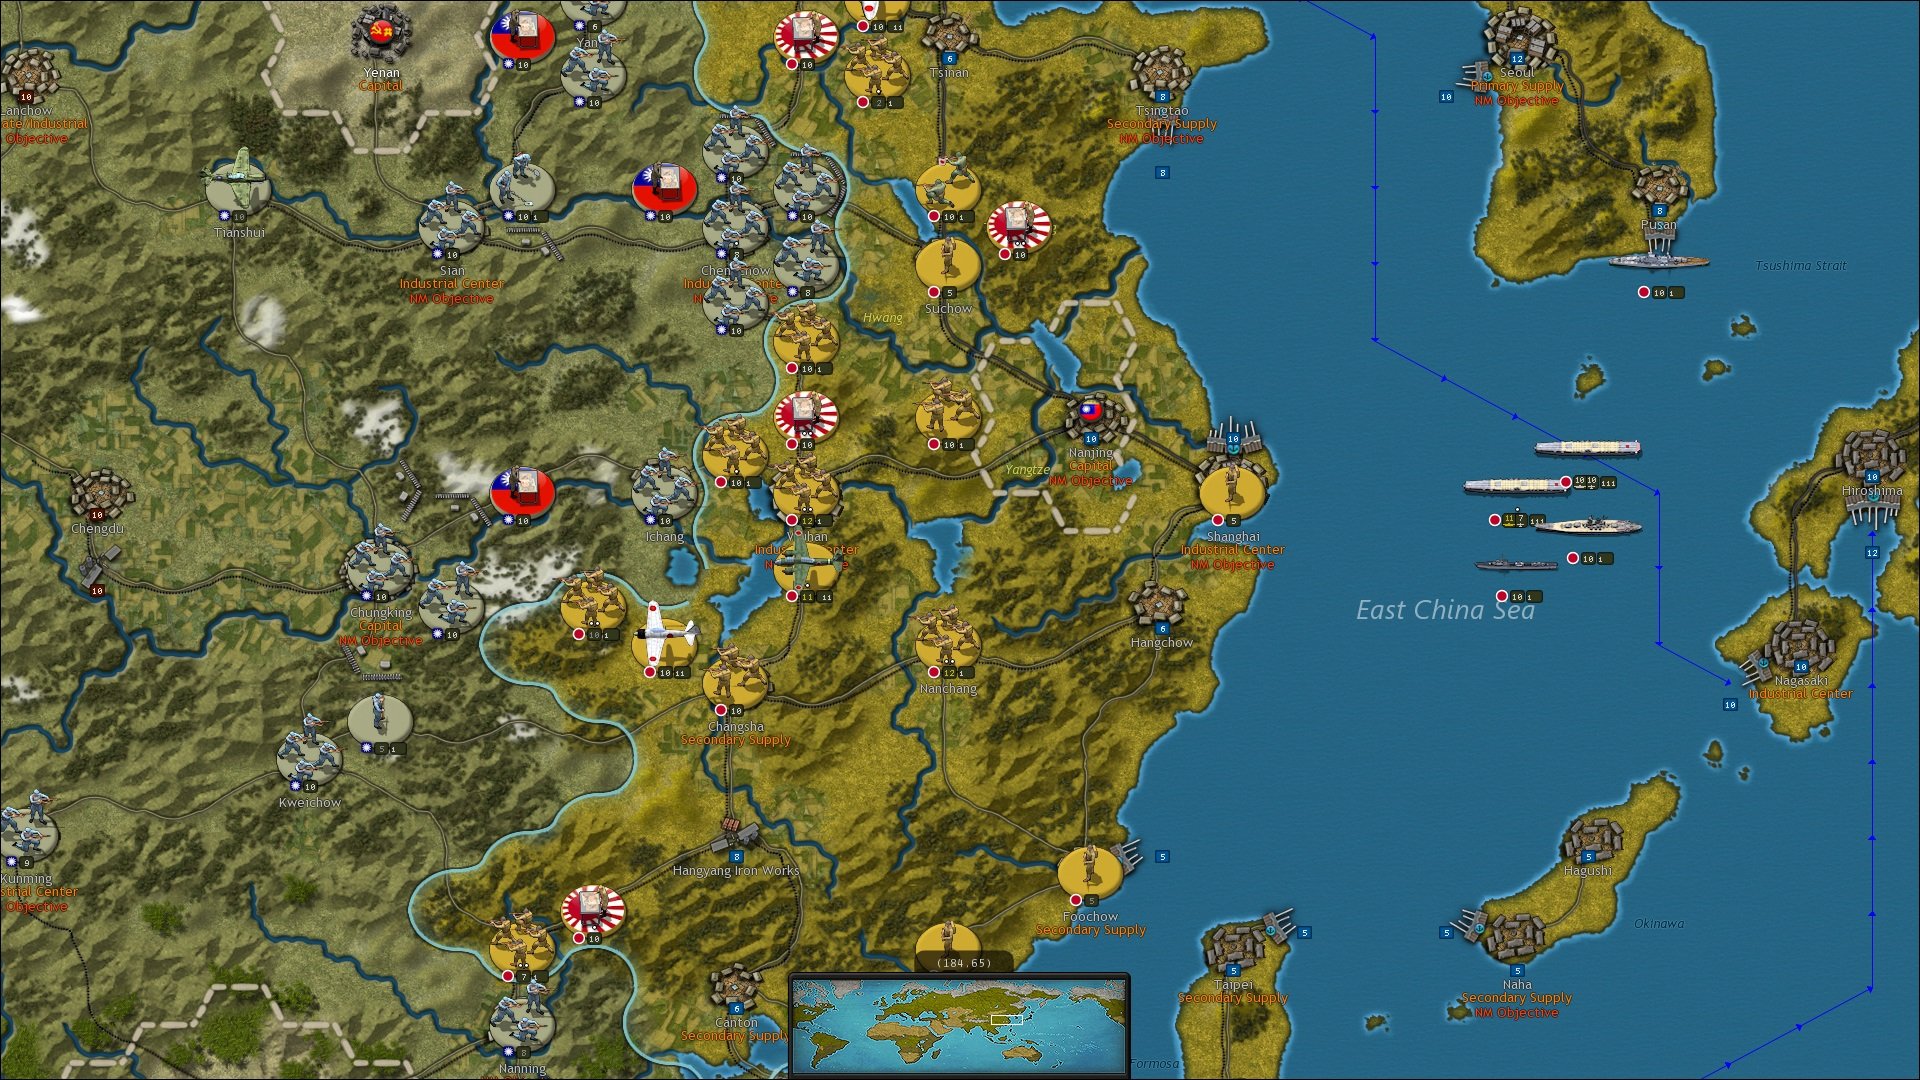 Best WW2 games - screenshot from Strategic Command 2: World at War, showing part of the China and Japan maps, with land and navy units